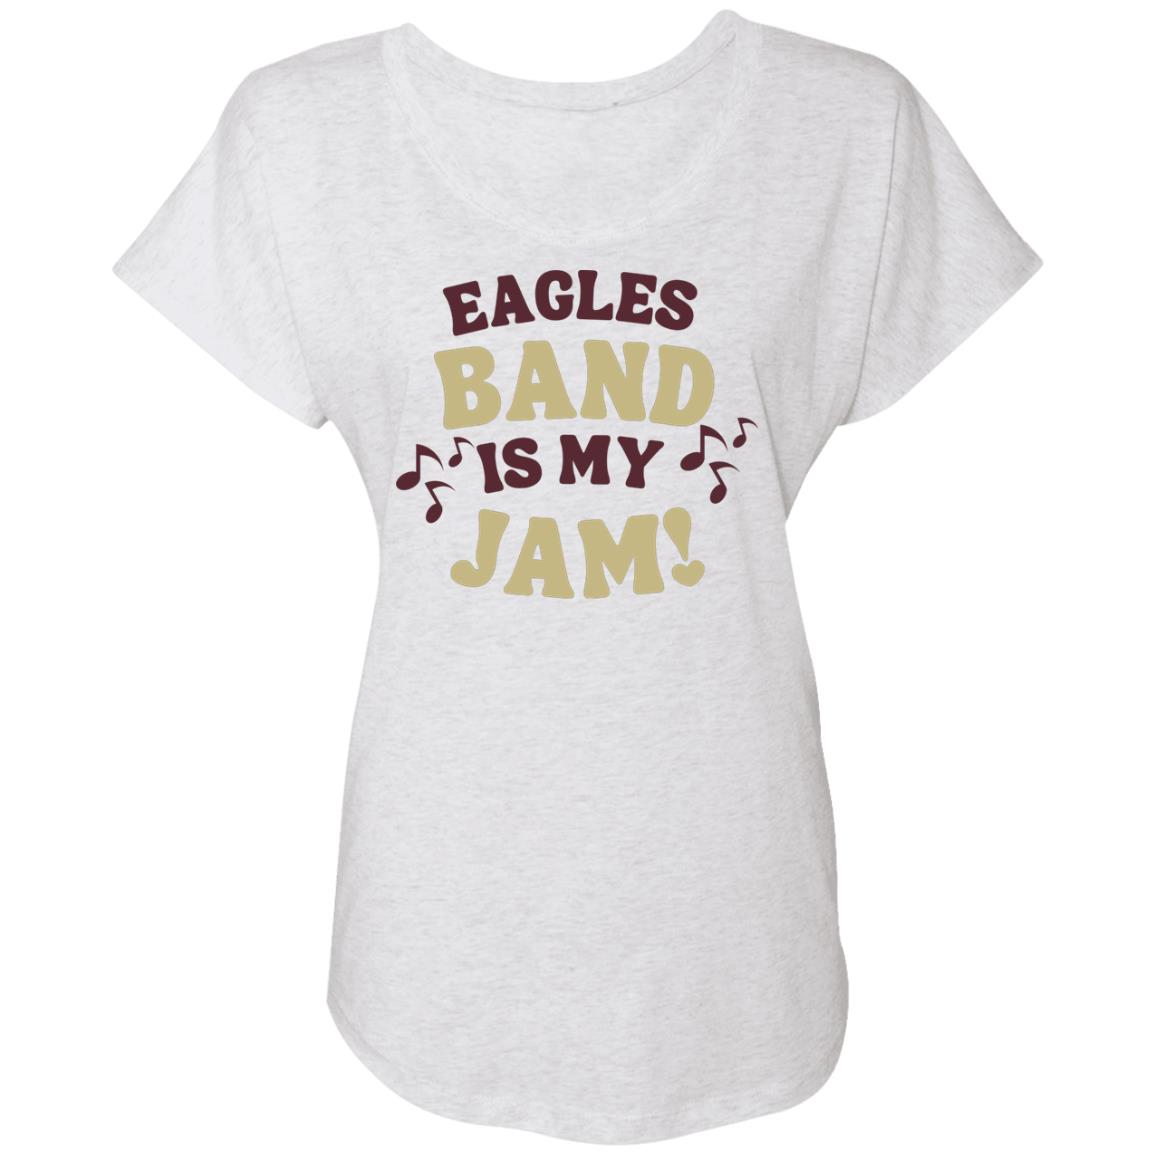 Women's Super Soft Band Jam Dolman Graphic Tee - New Albany Eagles